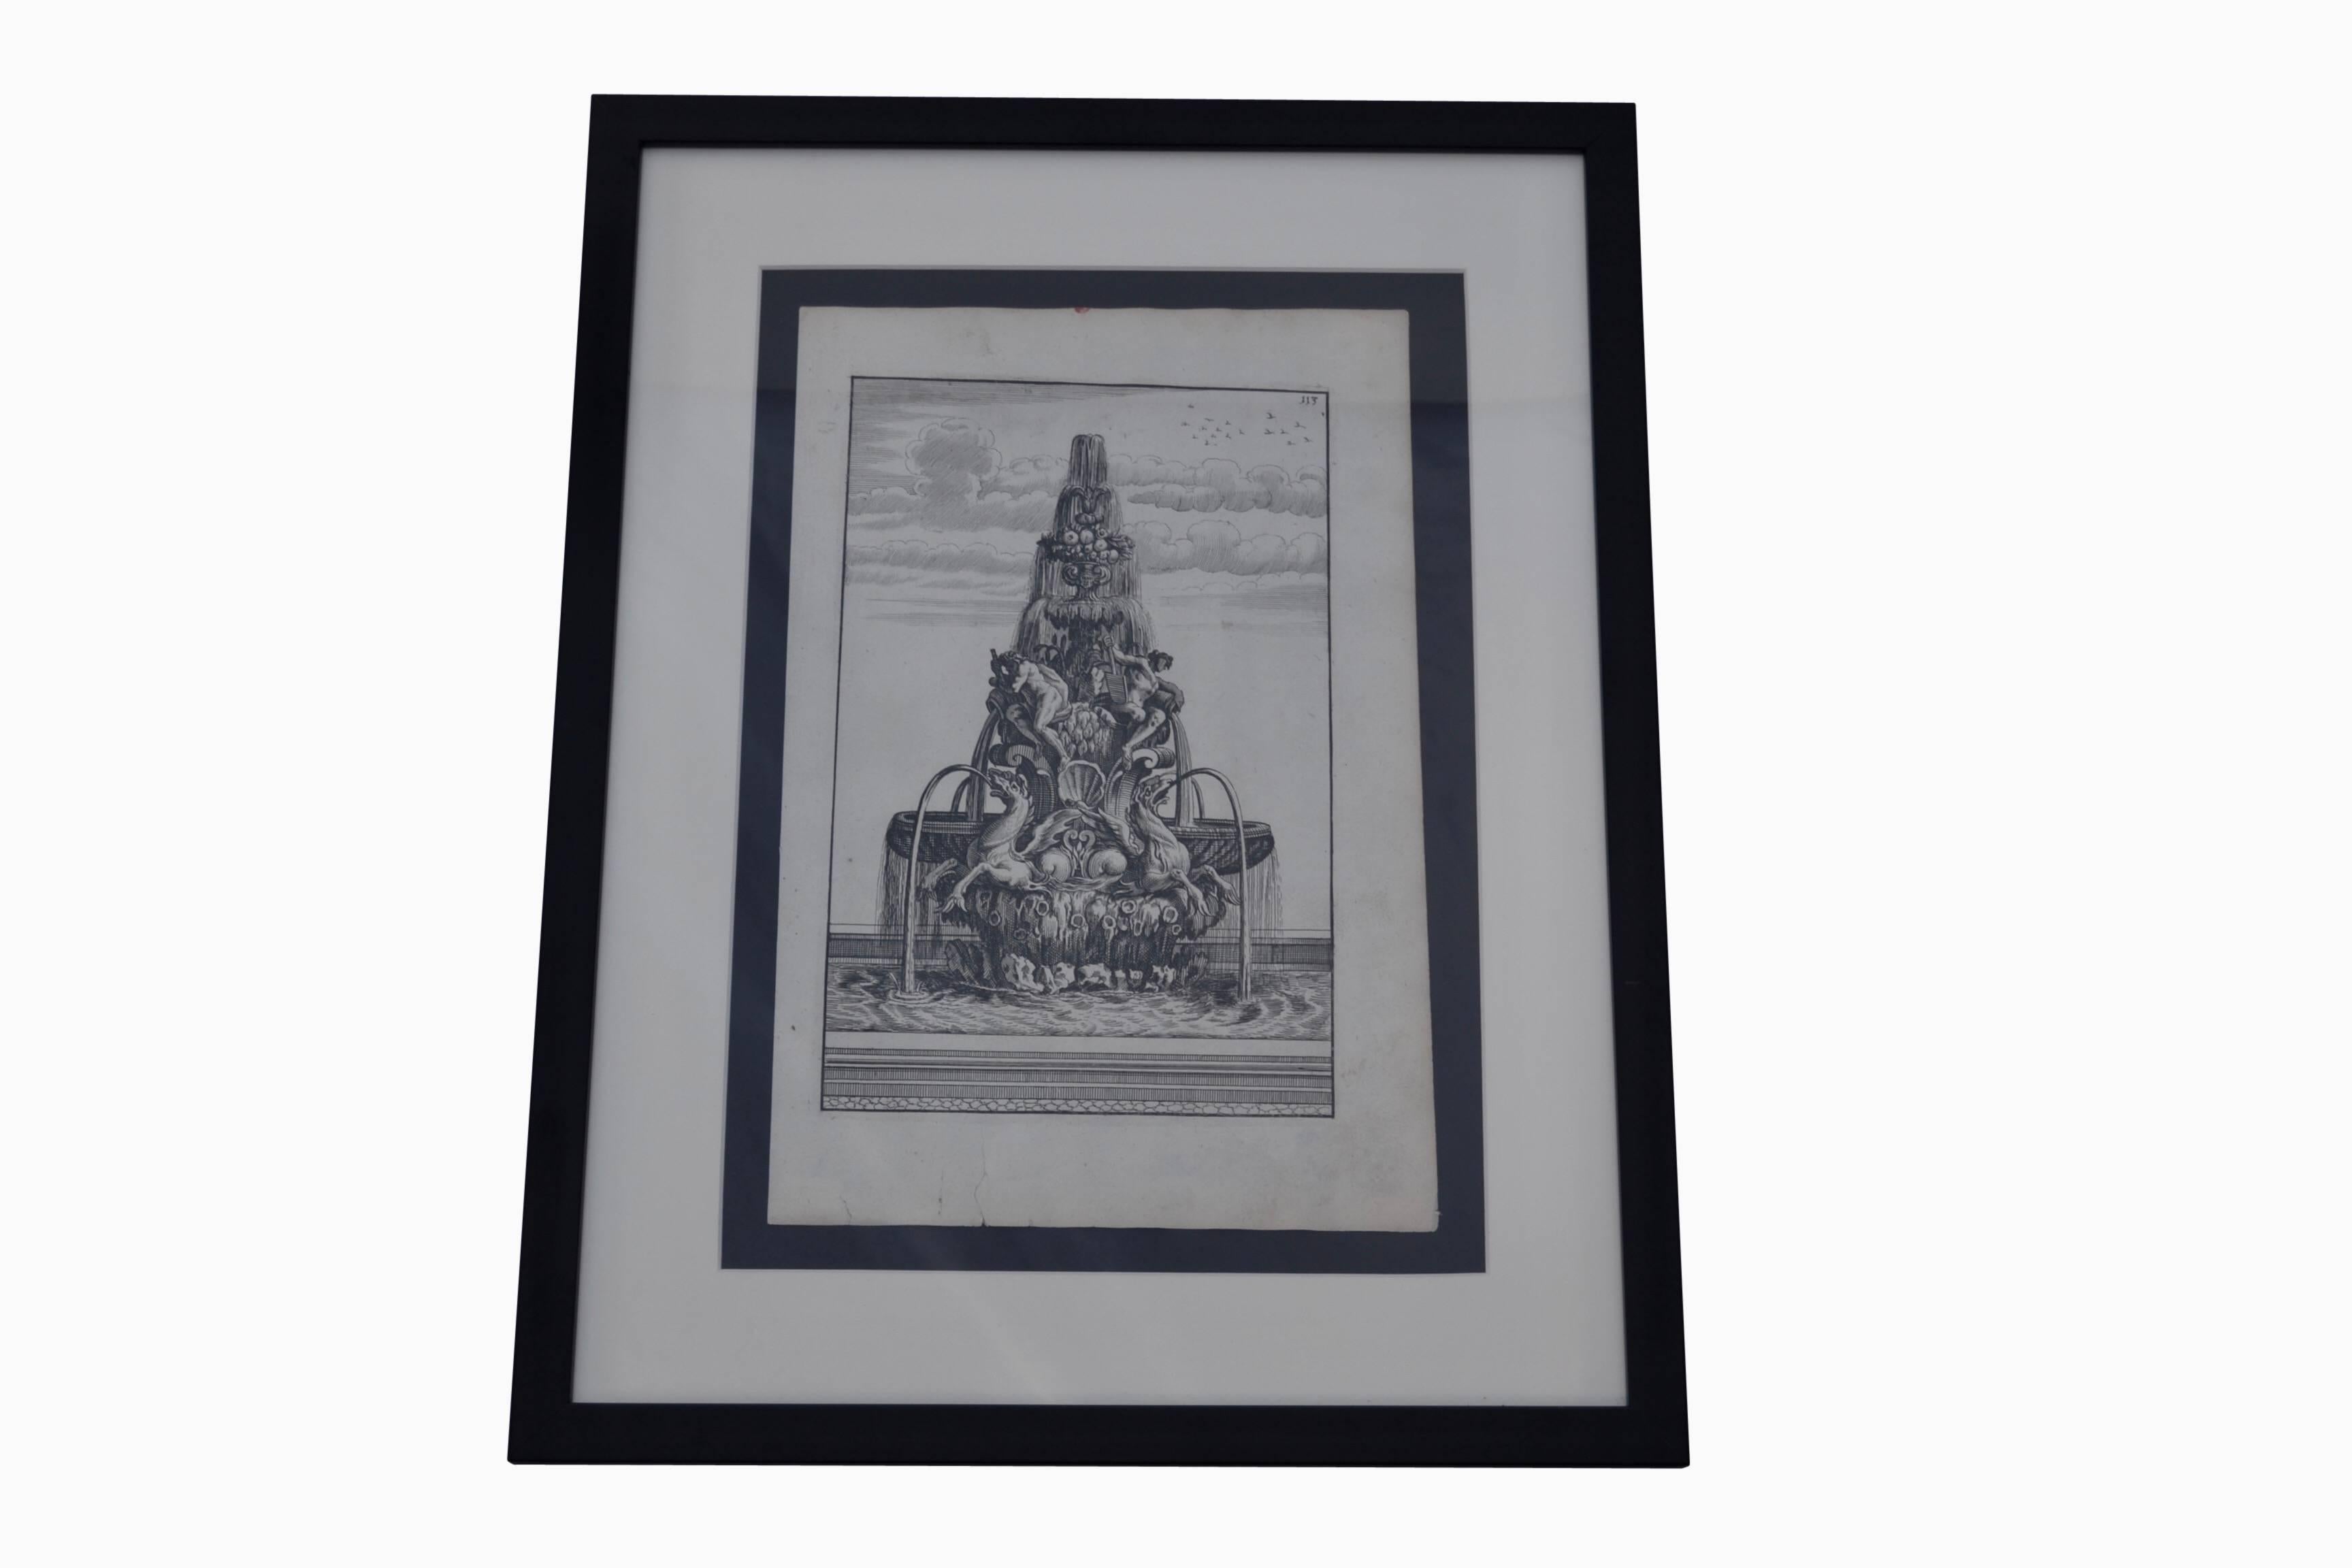 Pair of etchings featuring Greek-Roman mythological characters set over a fountain. Etchings are professionally framed in a matte black metal frame and white mate.